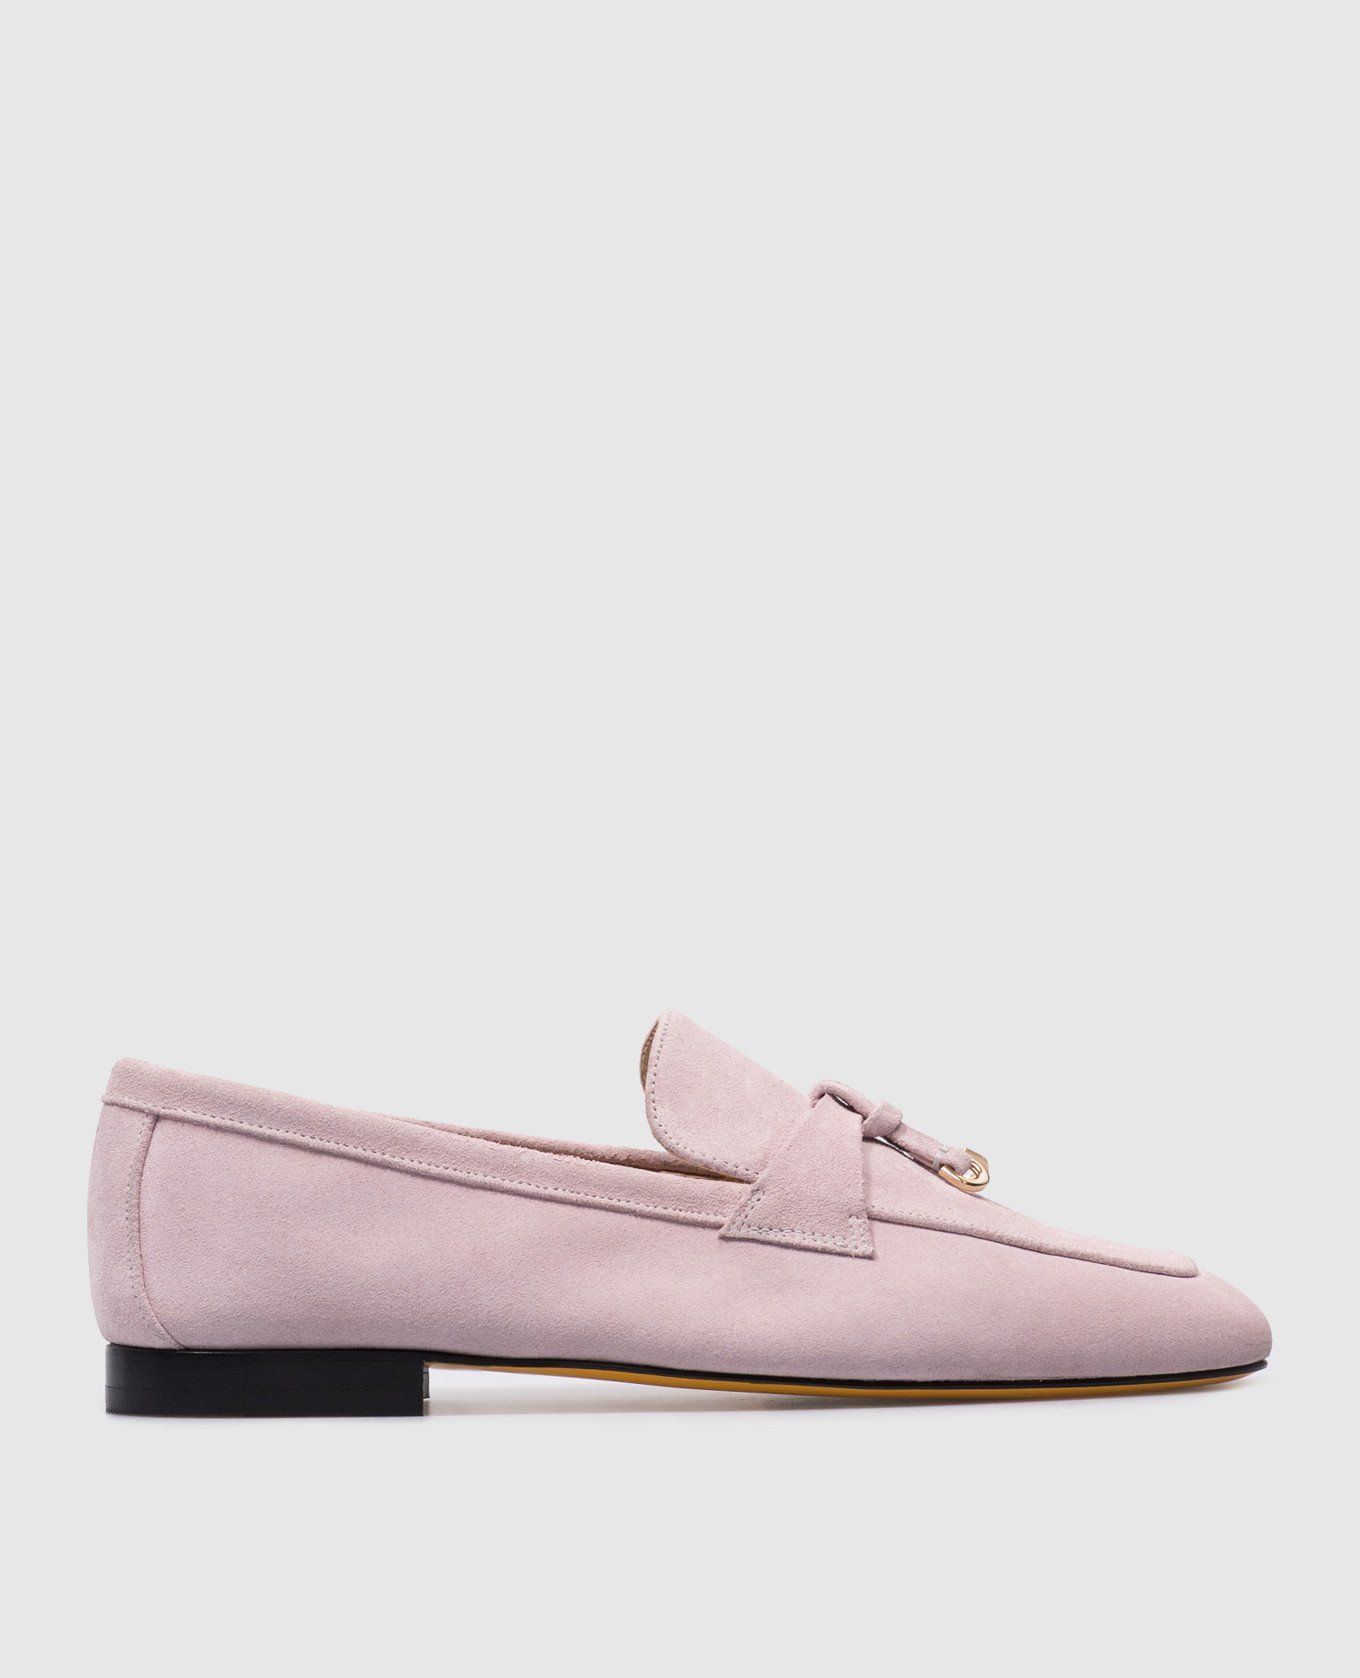 Coco pink suede loafers